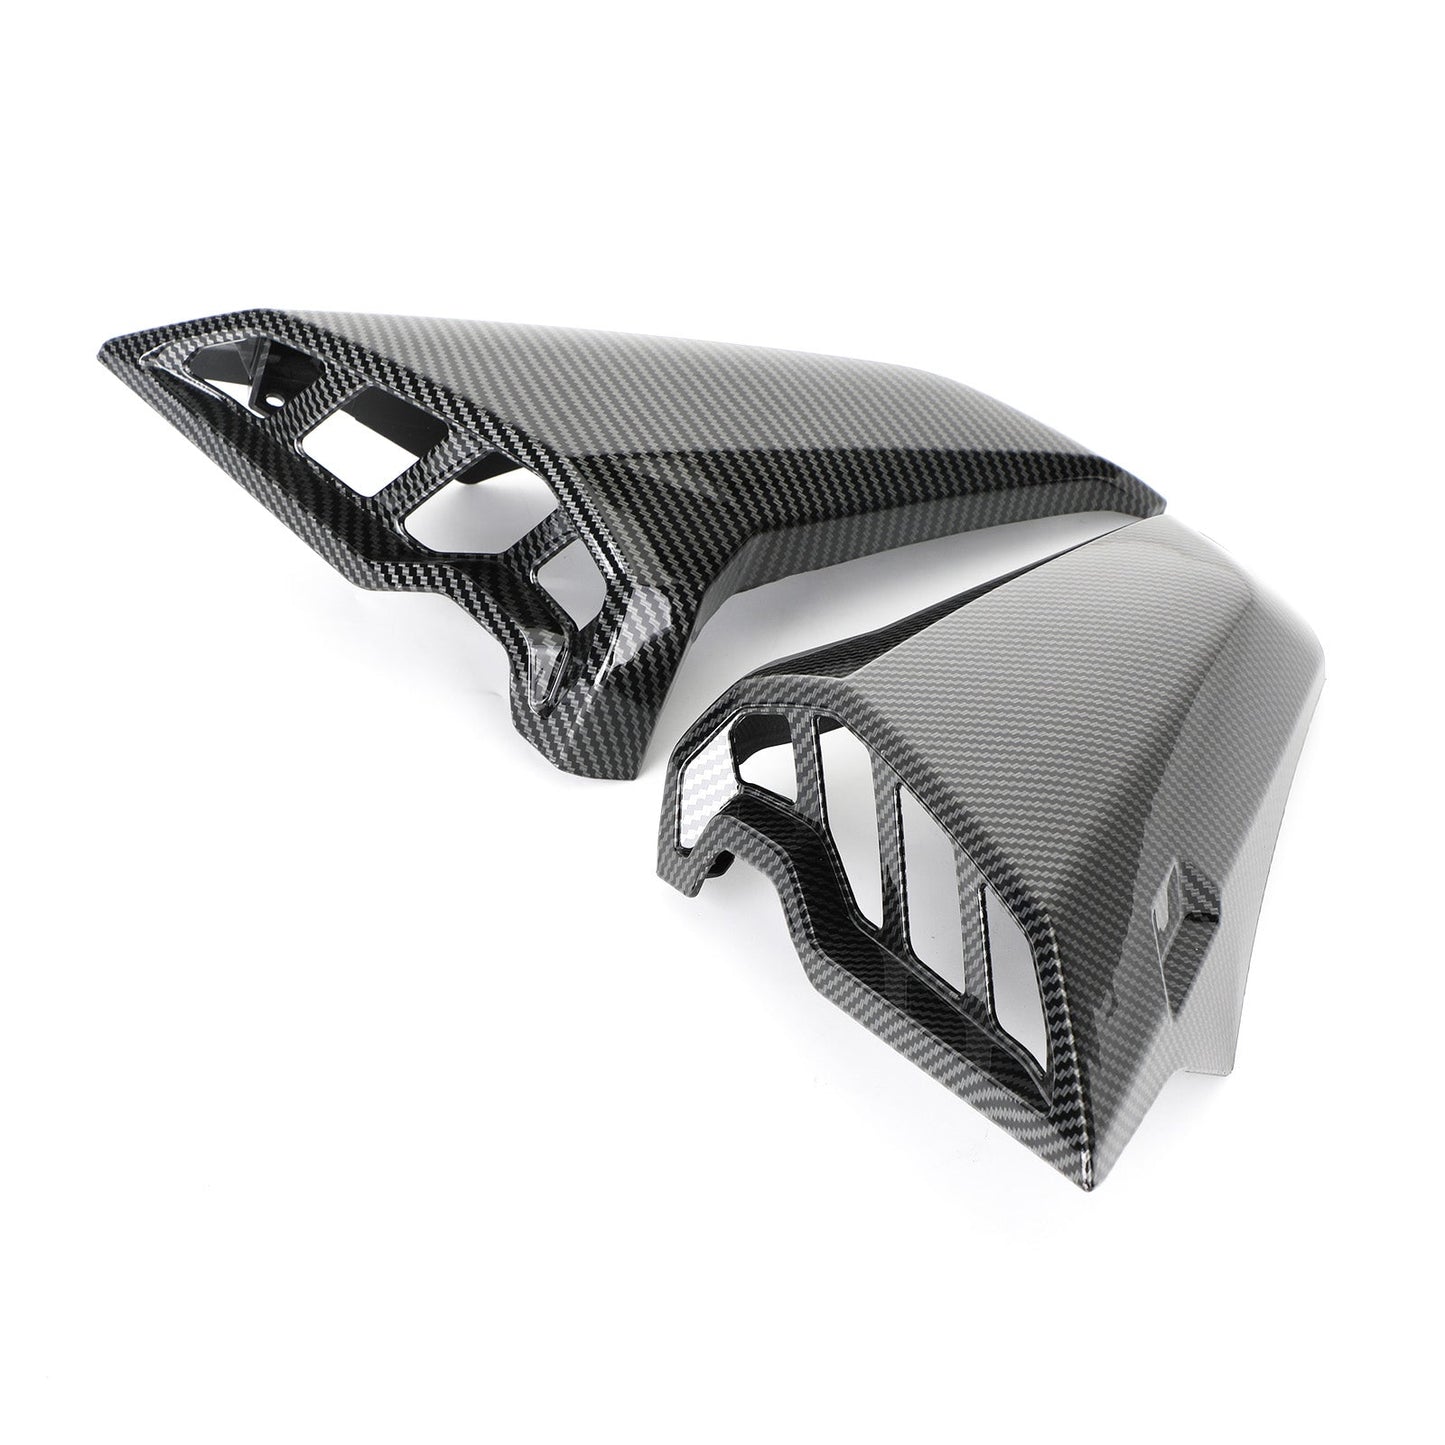 Black Air Intake Inlet Ram Tube Scoop Covers Fit for Yamaha FZ09 MT09 2017-2020